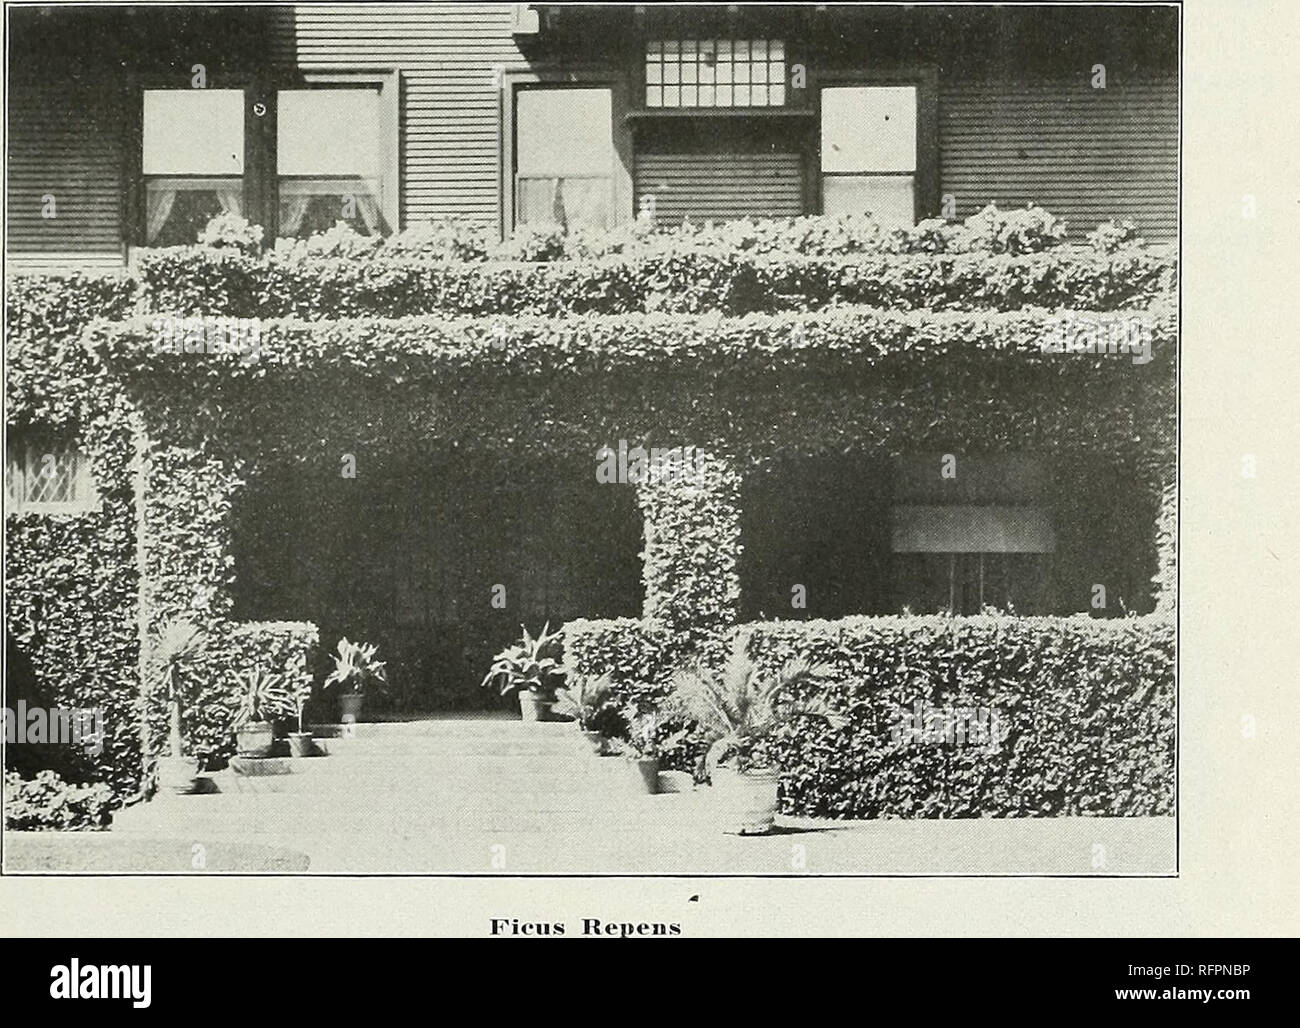 . The Fresno Nursery Co. Nurseries (Horticulture) California Fresno Catalogs; Nursery stock California Fresno Catalogs; Trees California Fresno Catalogs; Fruit trees California Fresno Catalogs; Grapes California Fresno Catalogs; Fruit California Fresno Catalogs; Climbing pl. FRESNO, CALIFORNIA 39 Climbing and Trailing Plants Well placed and carefully selected climb- ing vines add untold beauty to the house and garden. Their artistic appearance on the arbor, the veranda, the fence, or climb- ing the side of the house is such that no other treatment can produce. Euonymus Japonicus radicans argen Stock Photo